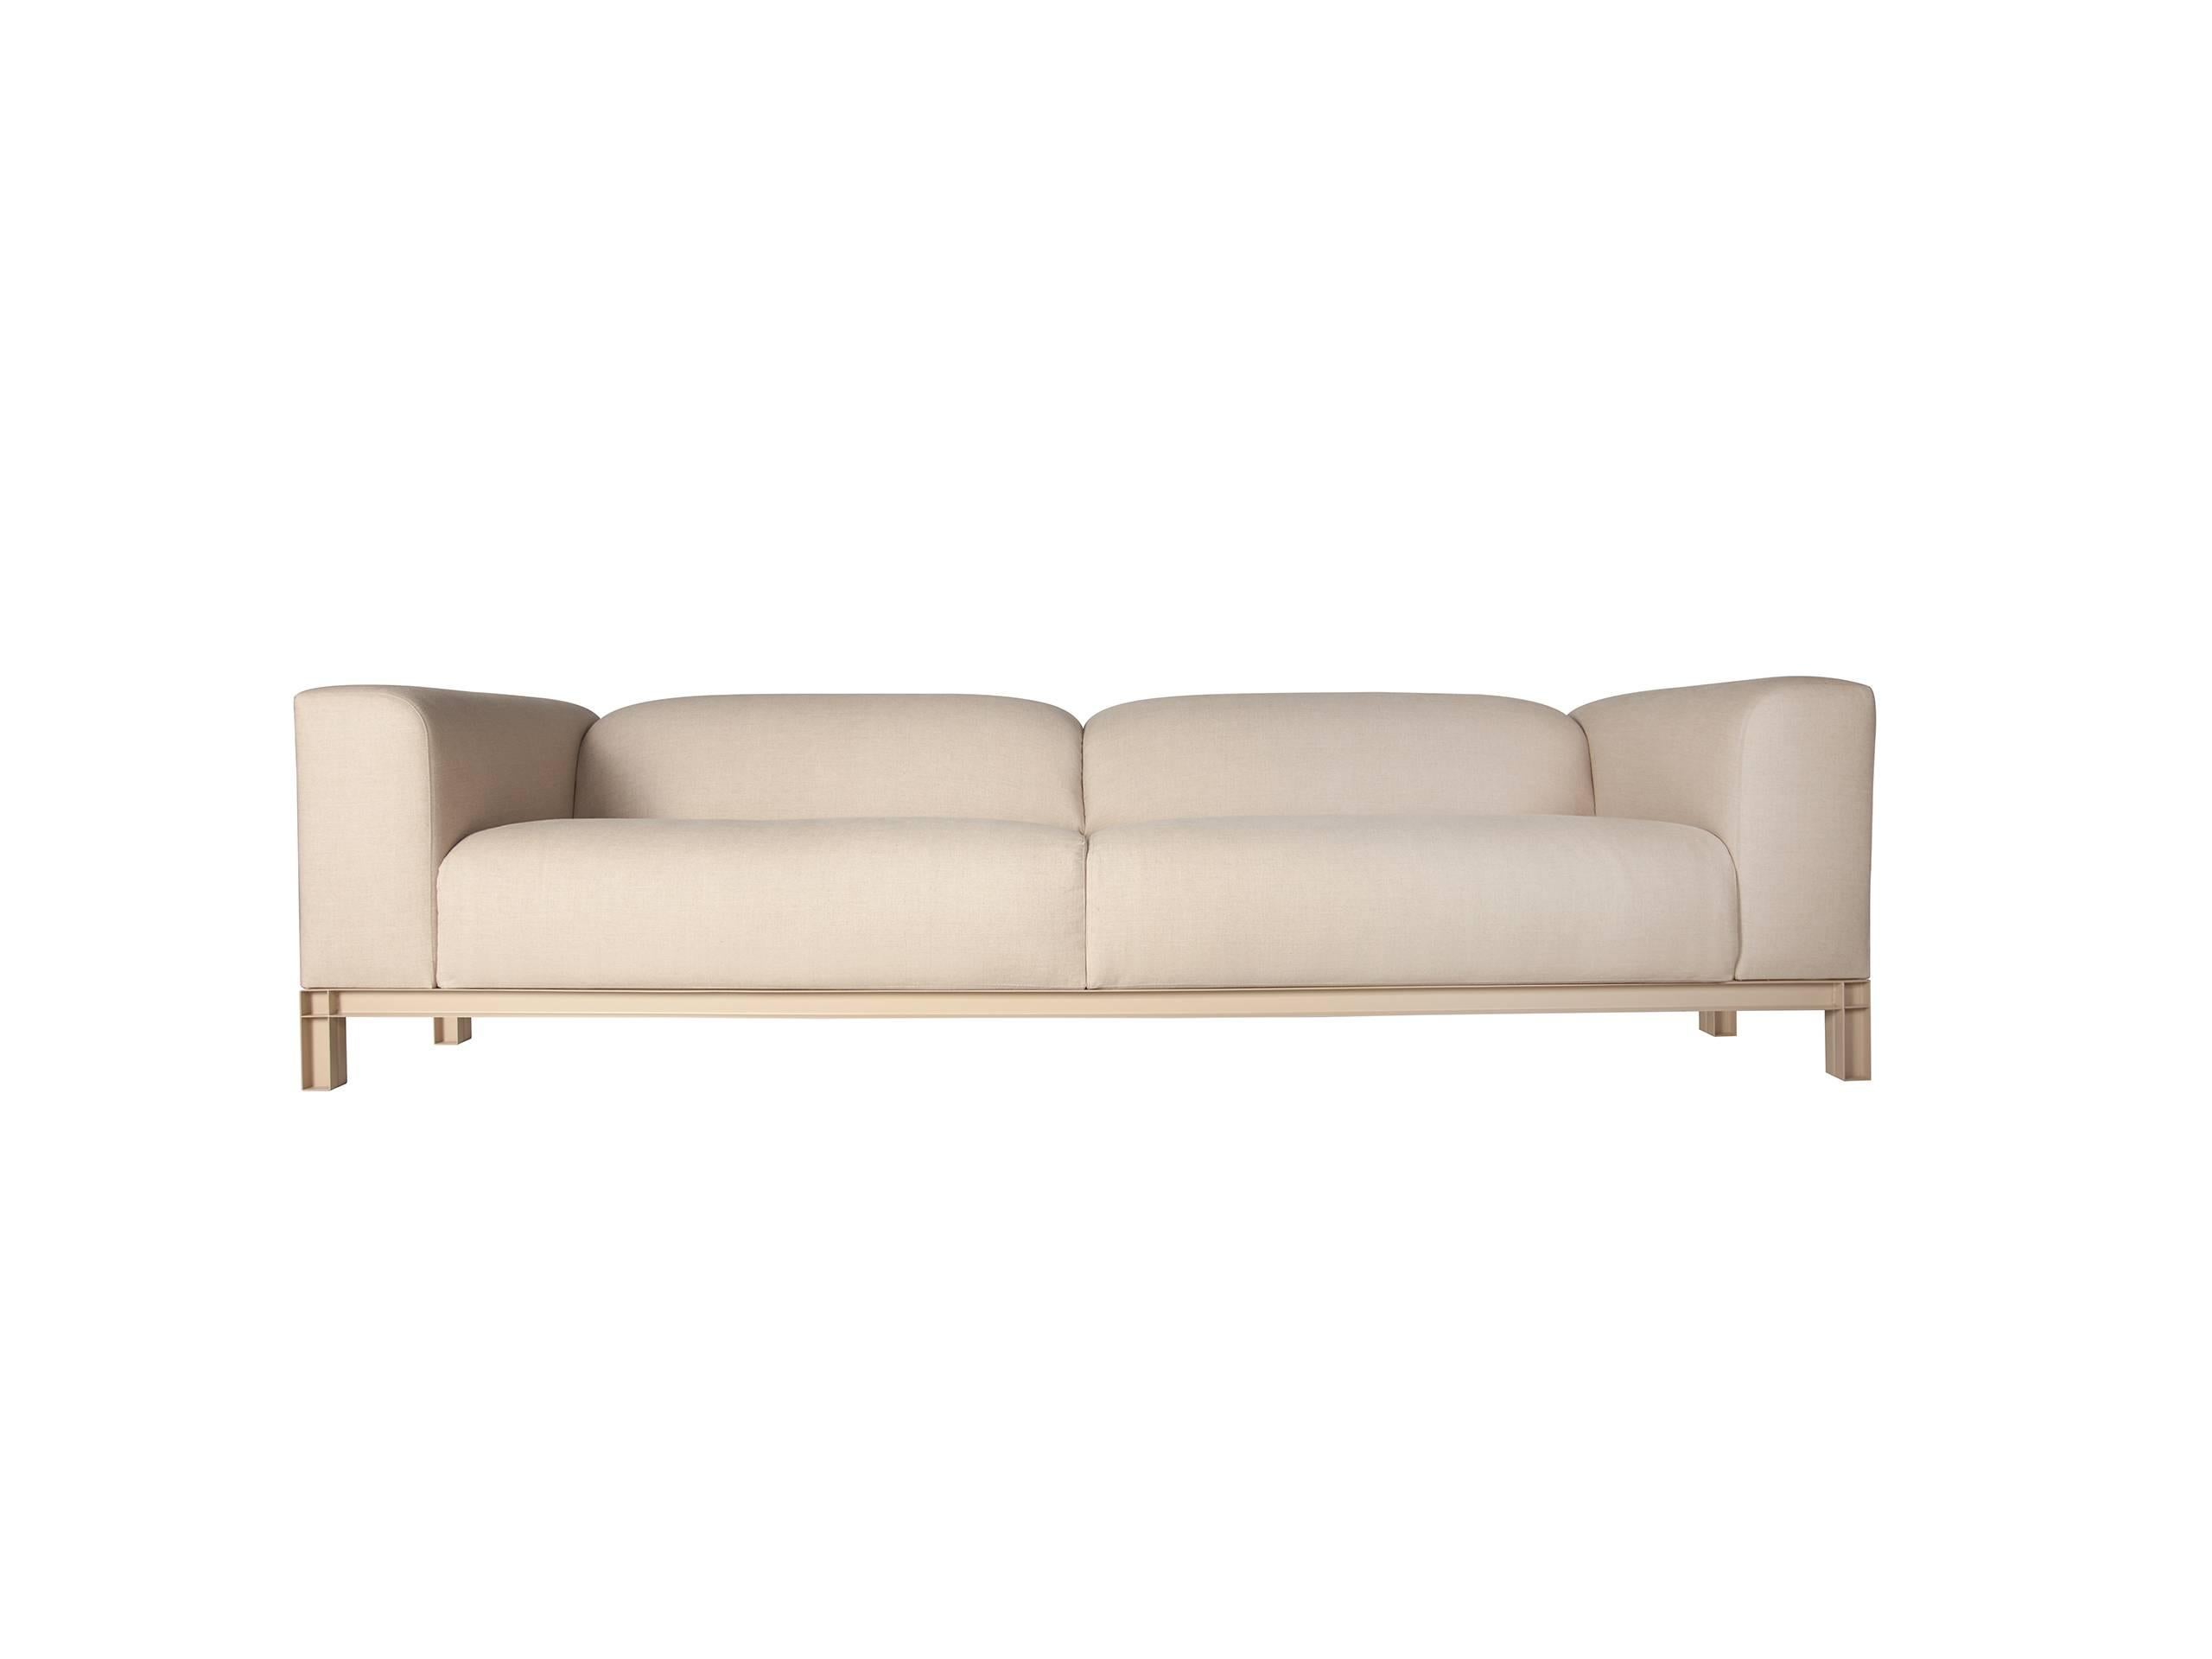 One of the main characteristics of Lattoog work is the reinterpretation and application of architectural elements in furniture pieces. This sofa is an example of it.
The base of this sofa was inspired in the simplicity and hardness of metal